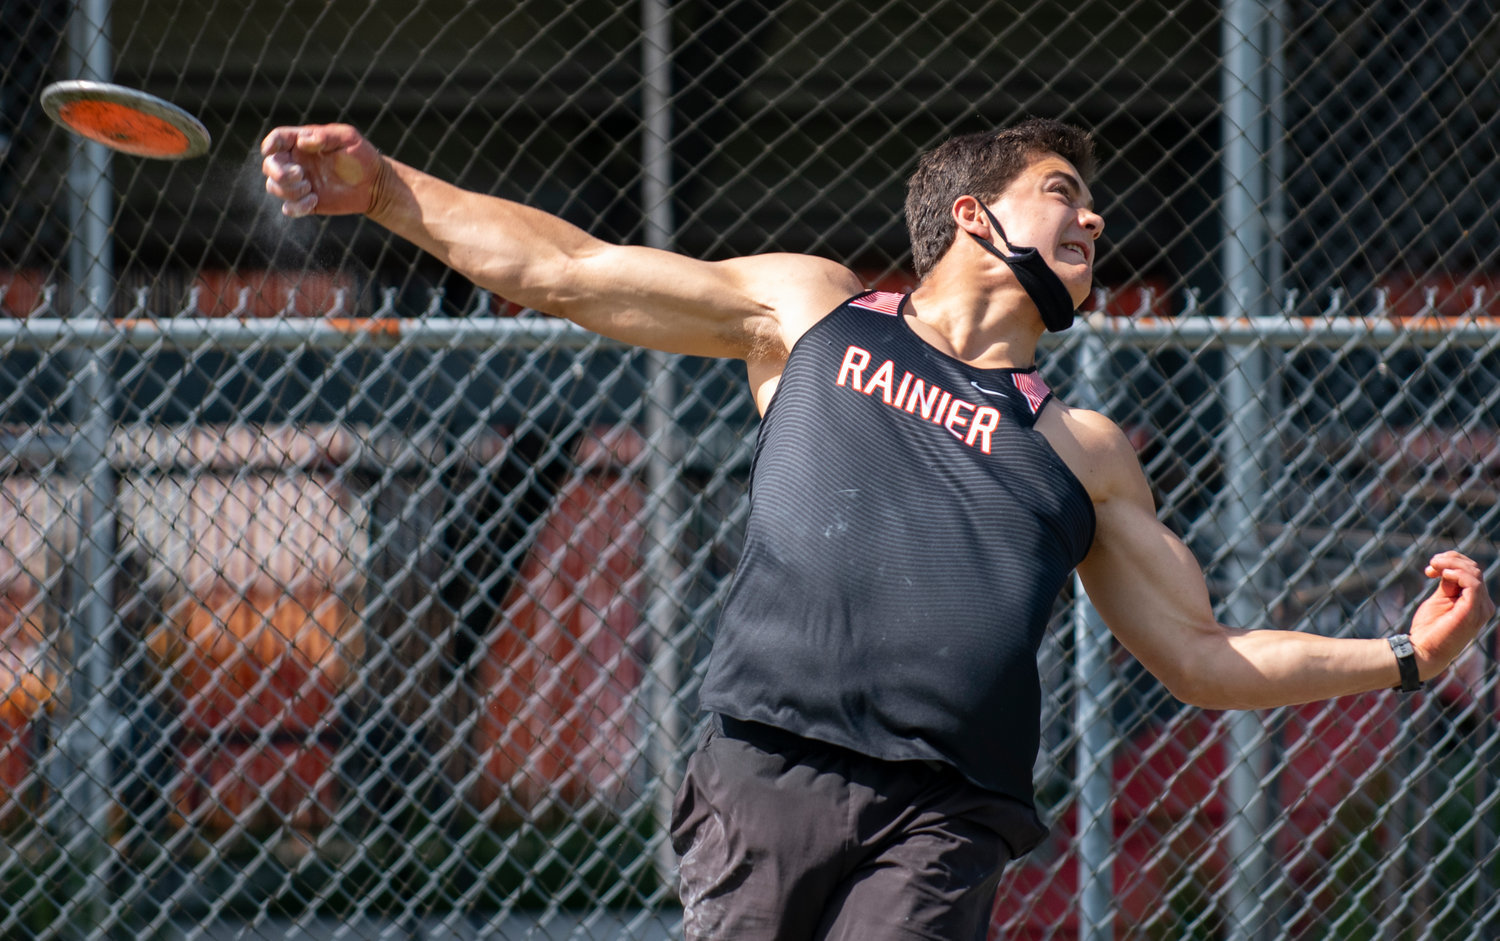 Rainier junior Jeremiah Nubbe uncorks a throw in the boys discus at the 2B District 4 Track and Field Championships on Thursday in Rainier.